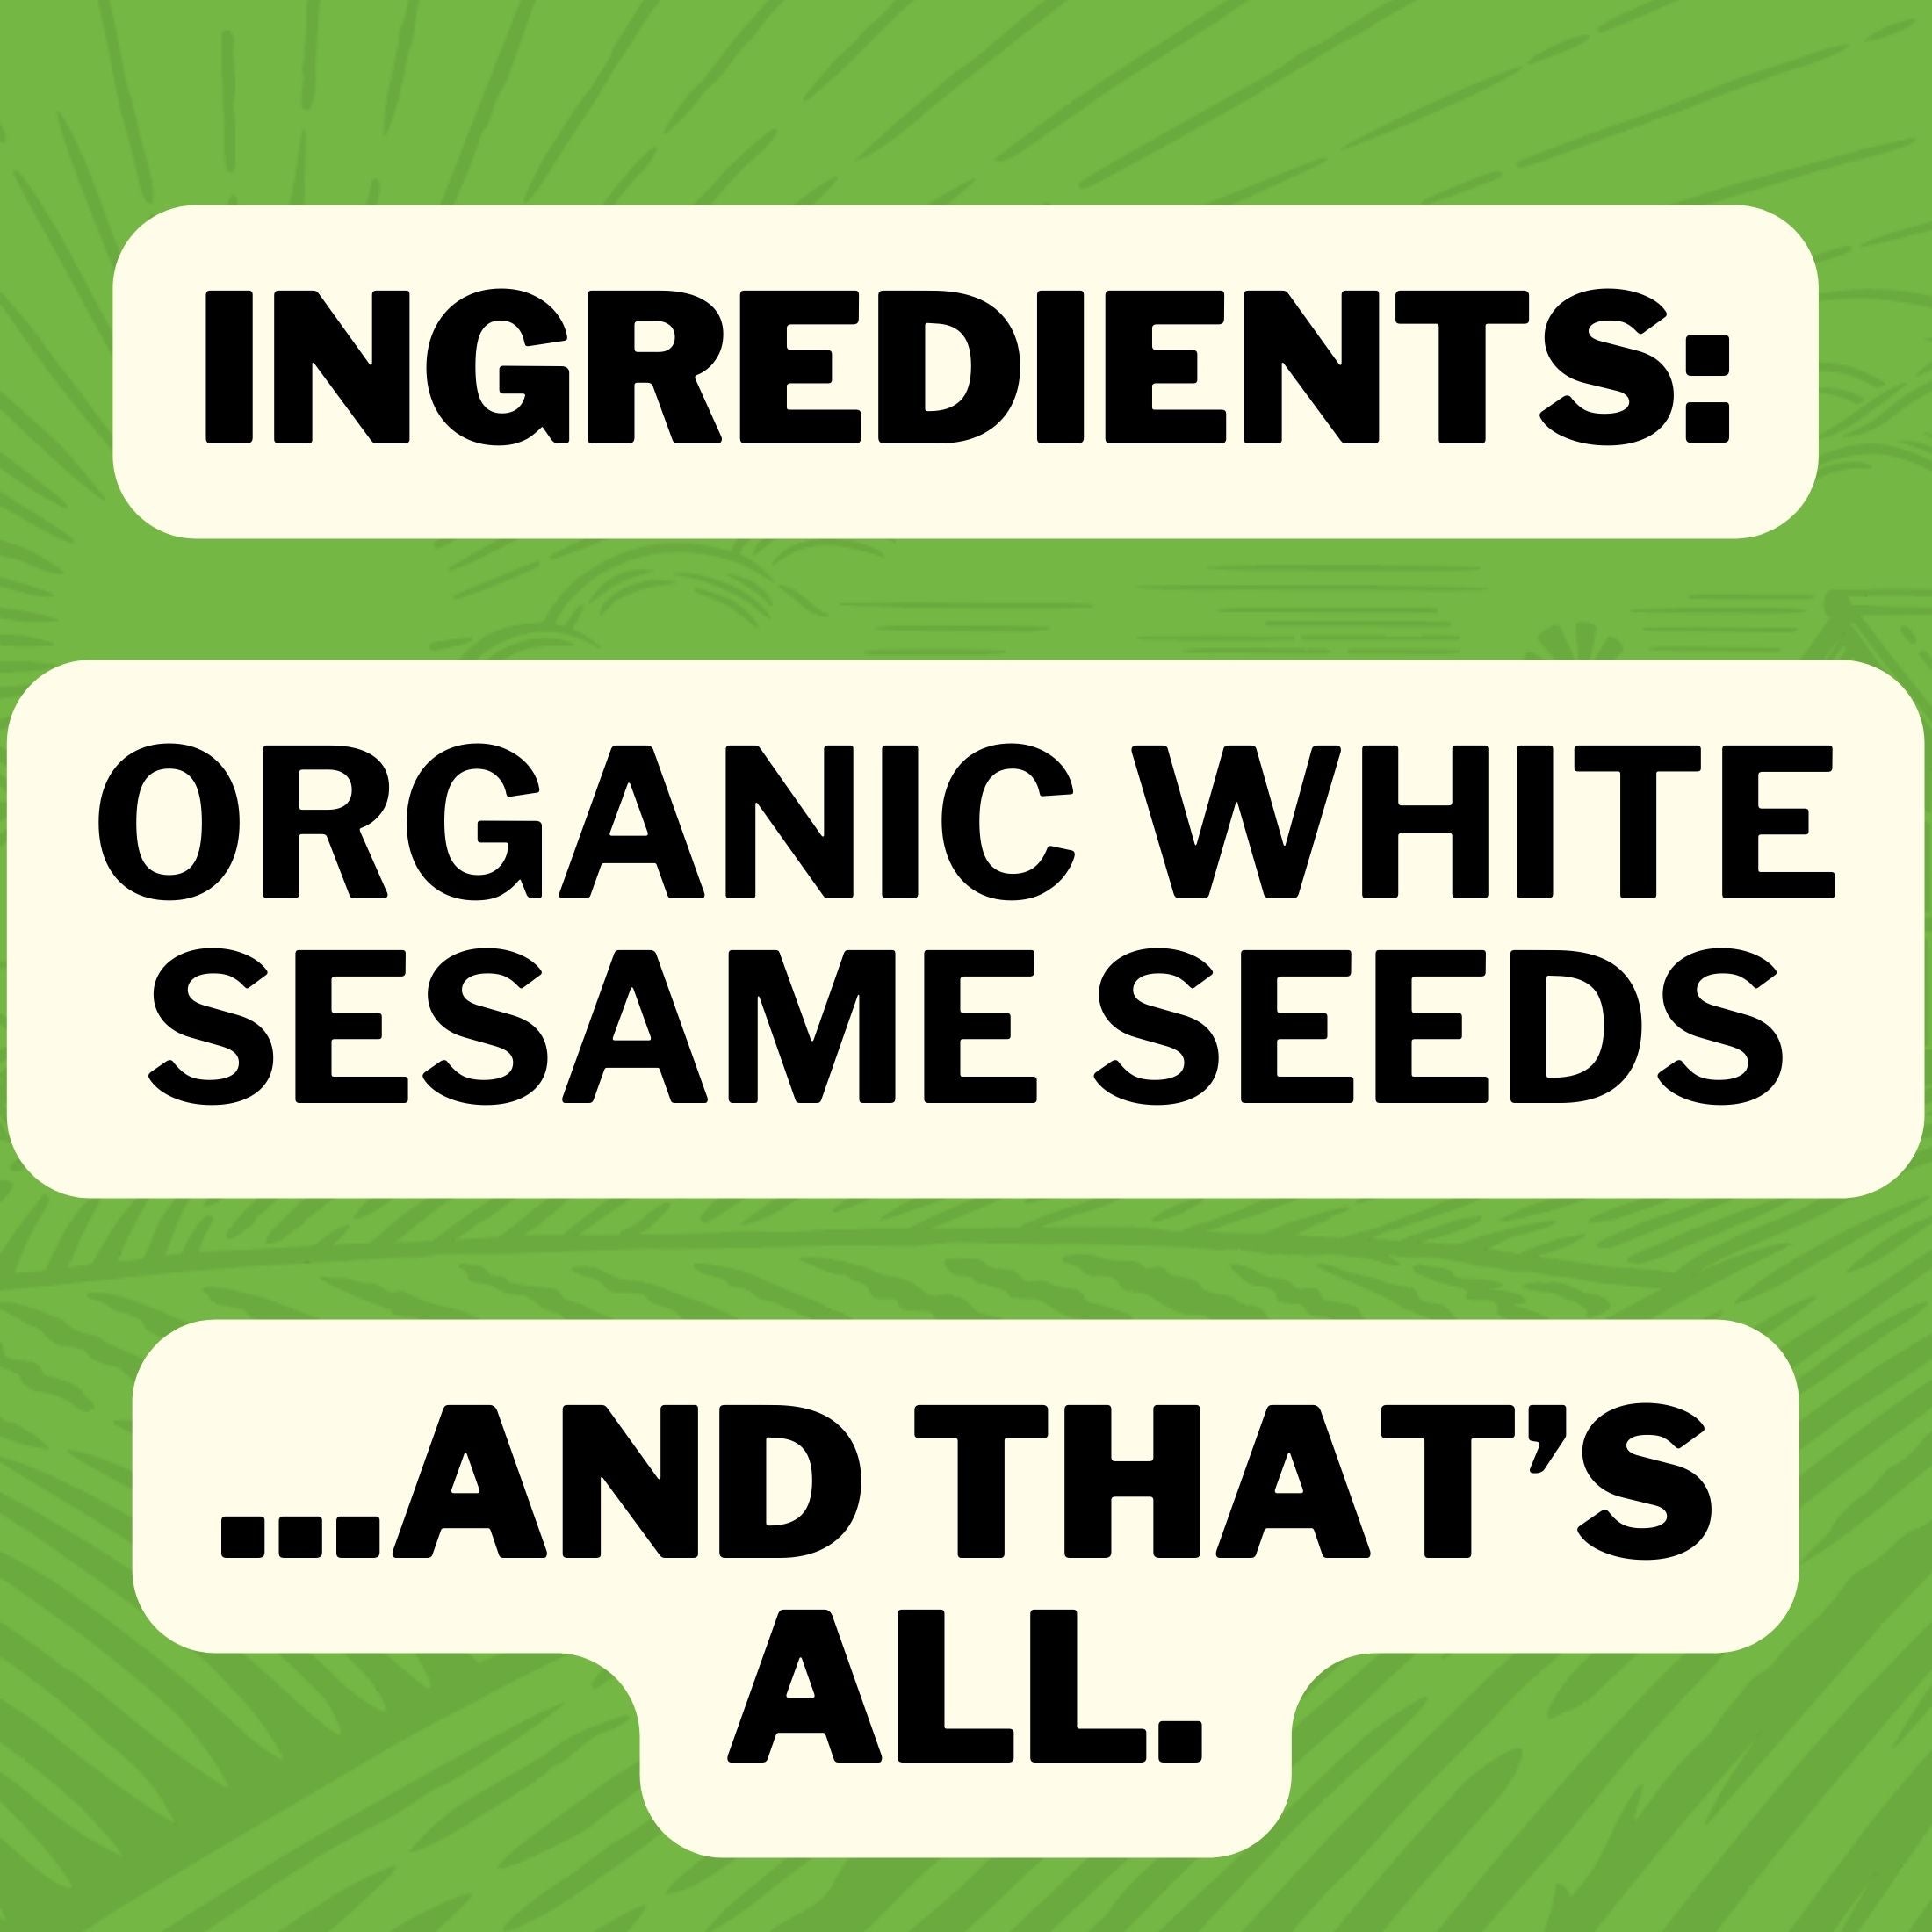 Ingredients: Organic Whole White Sesame Seeds... and that's all.